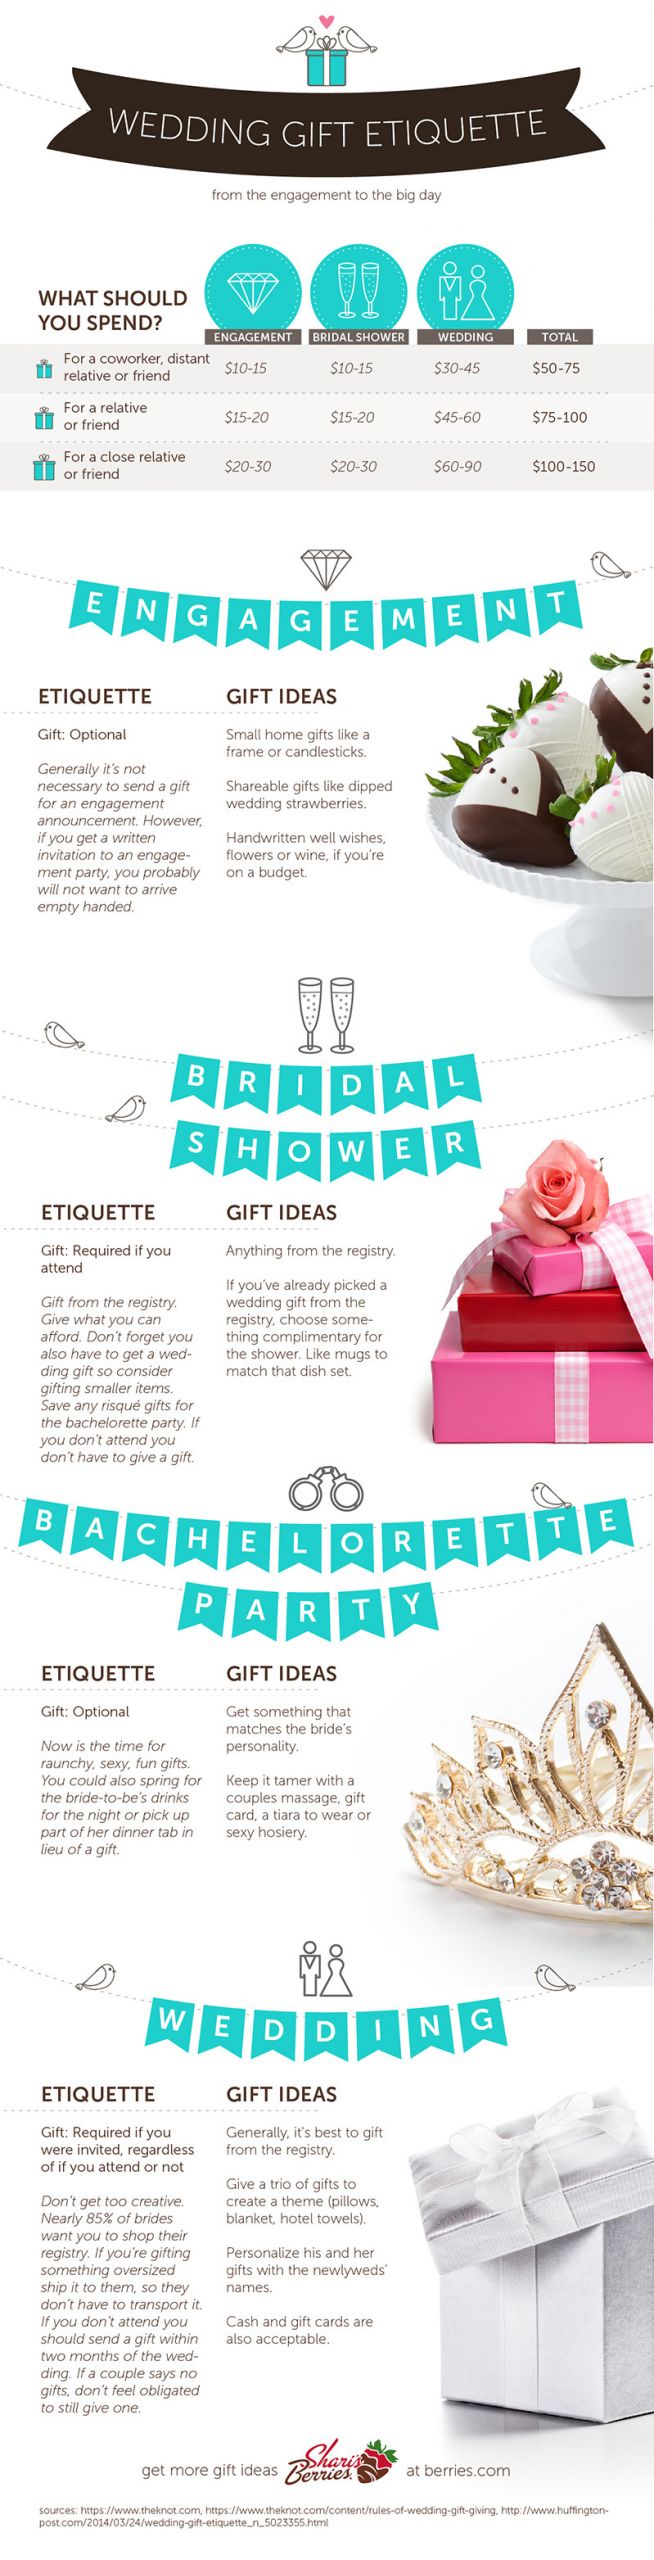 Wedding Gift Etiquette
 Wedding Gift Etiquette Tips and Ideas For Your Event